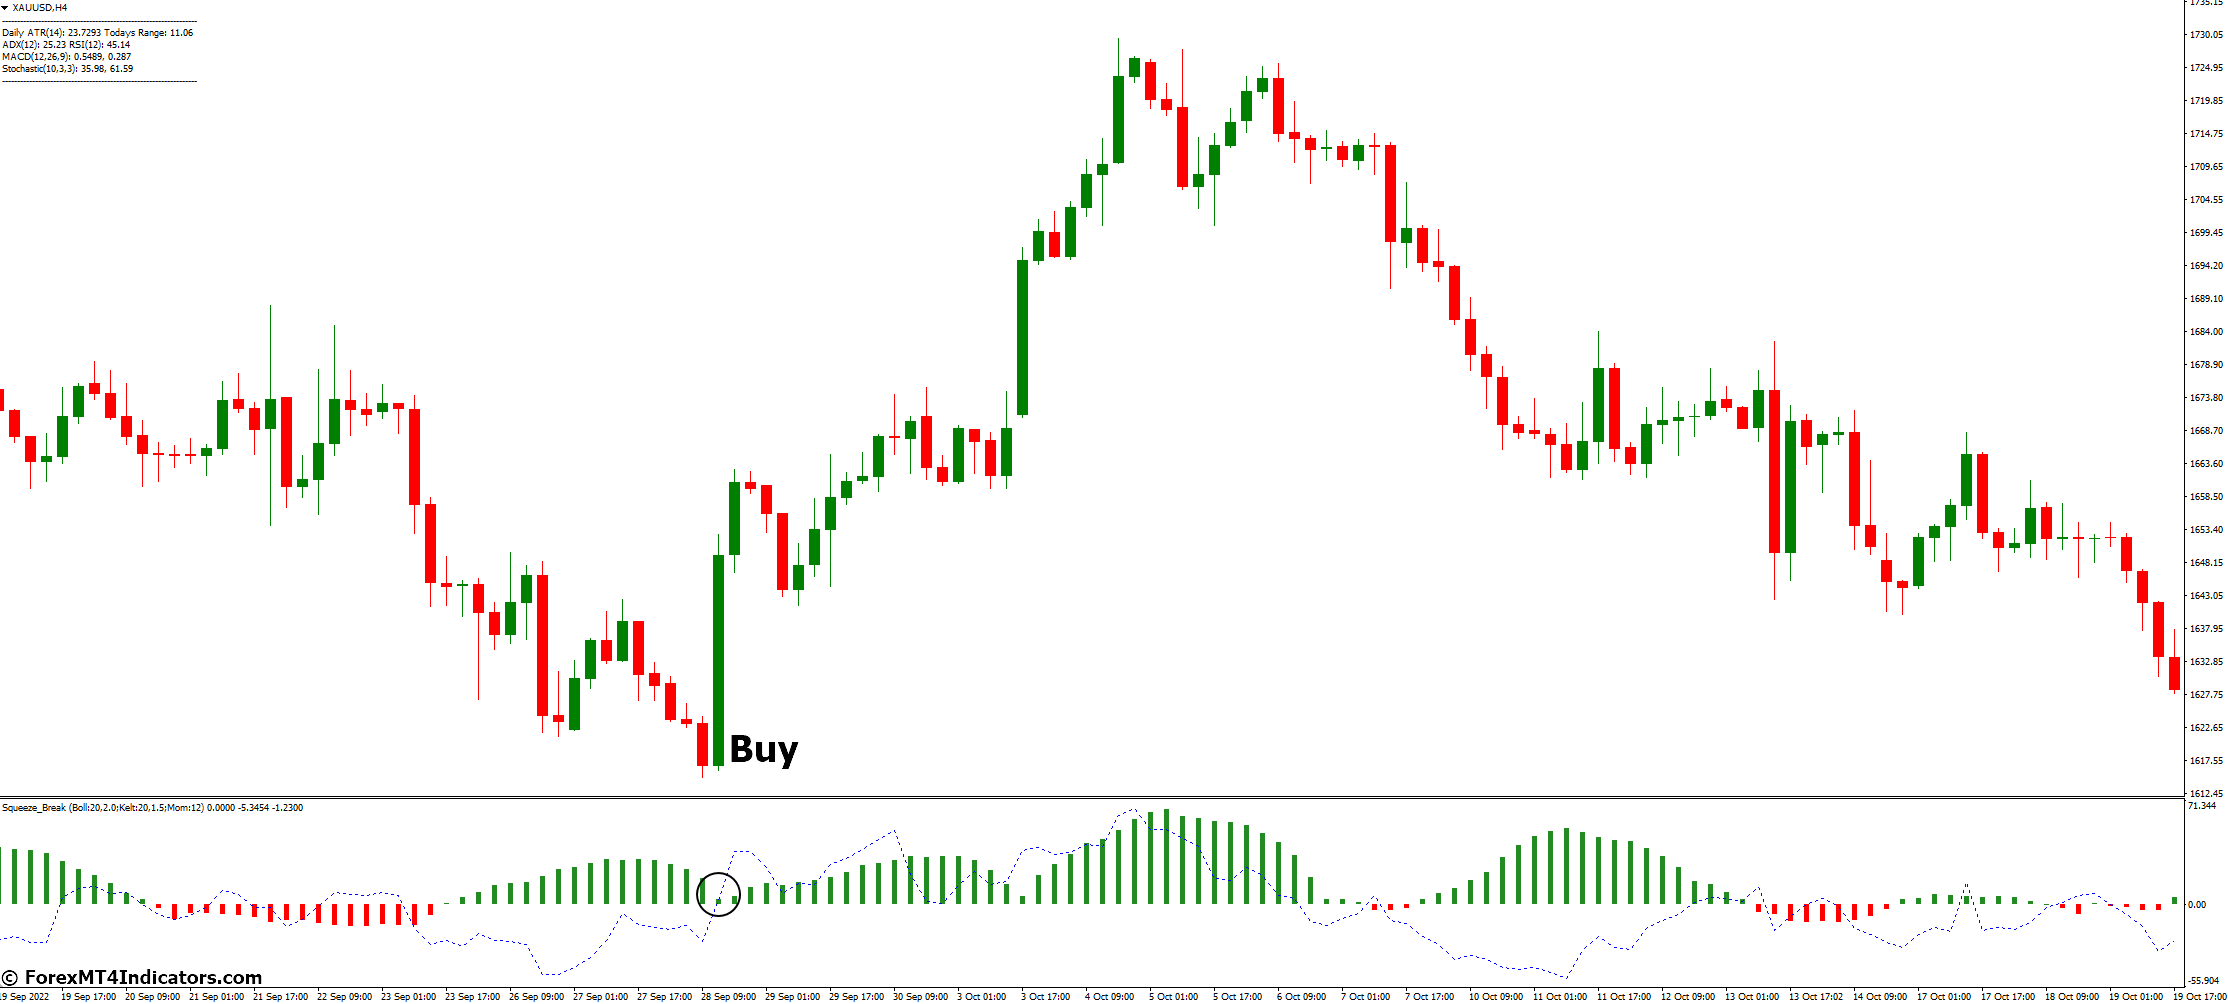 How to Trade with Squeeze Break MT4 Indicator - Buy Entry